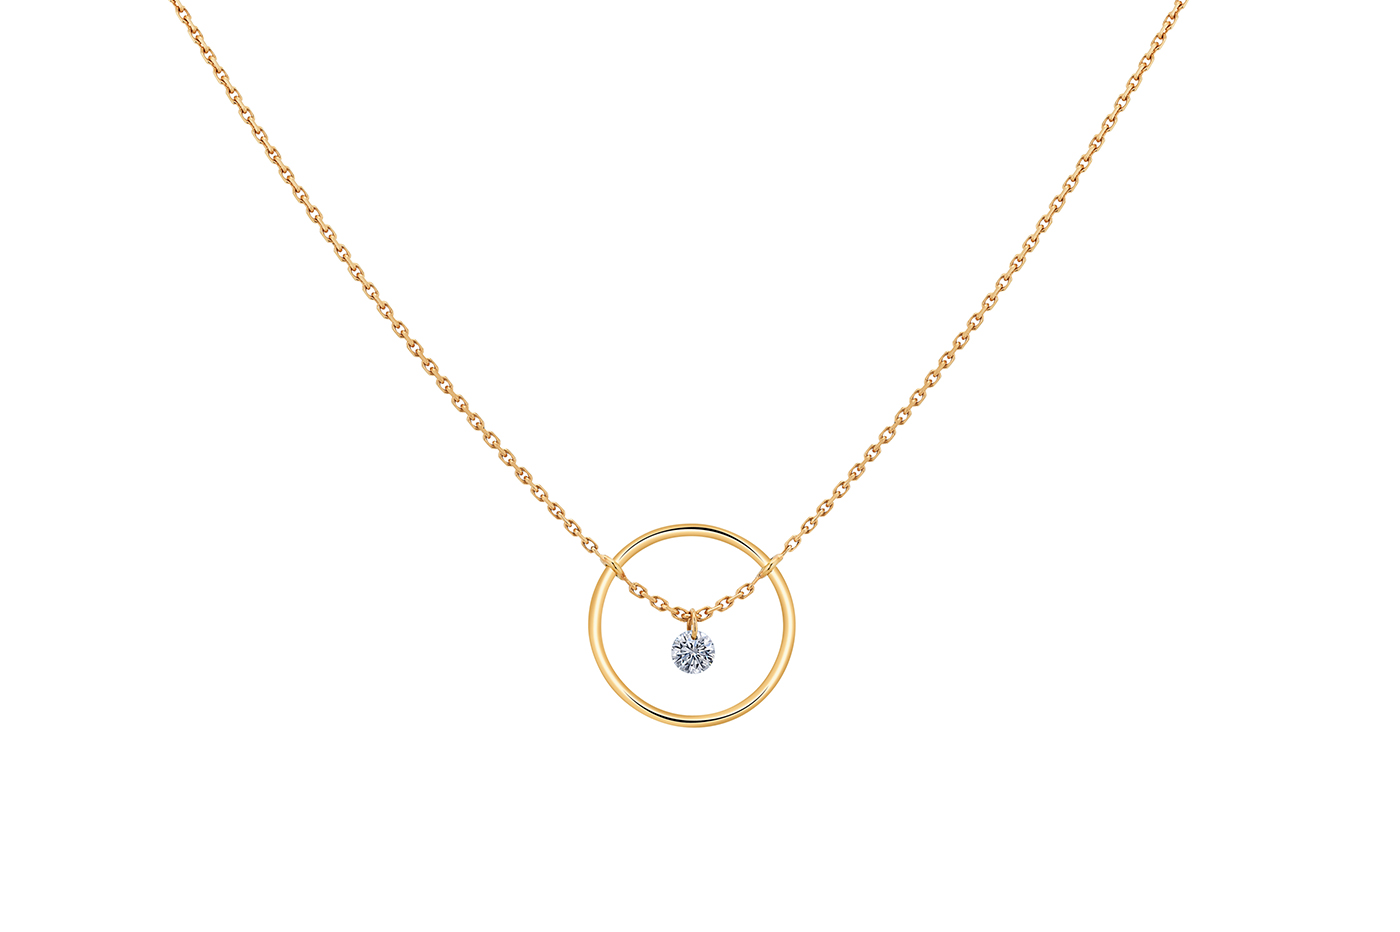 Collier EXCENTRIQUE, diamant GSI, 0,07 ct approx., or 18KT, 2,1gr. 